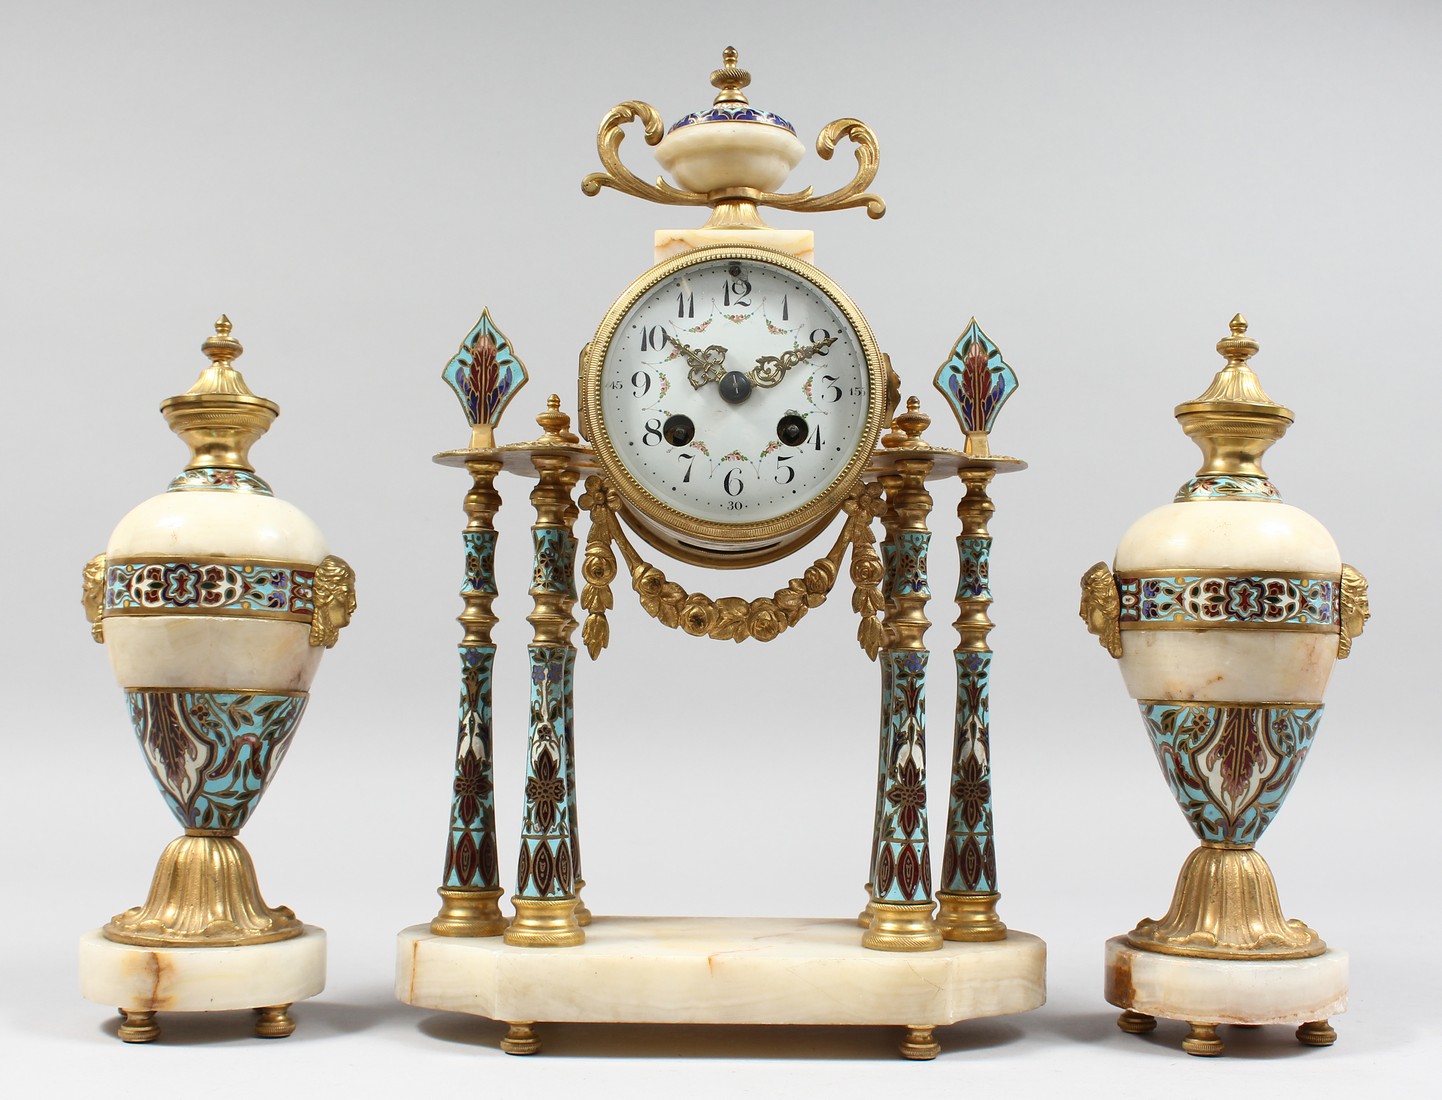 A 19TH CENTURY FRENCH MARBLE ORMOLU AND CHAMPLEVE ENAMEL CLOCK GARNITURE, the clock with eight day